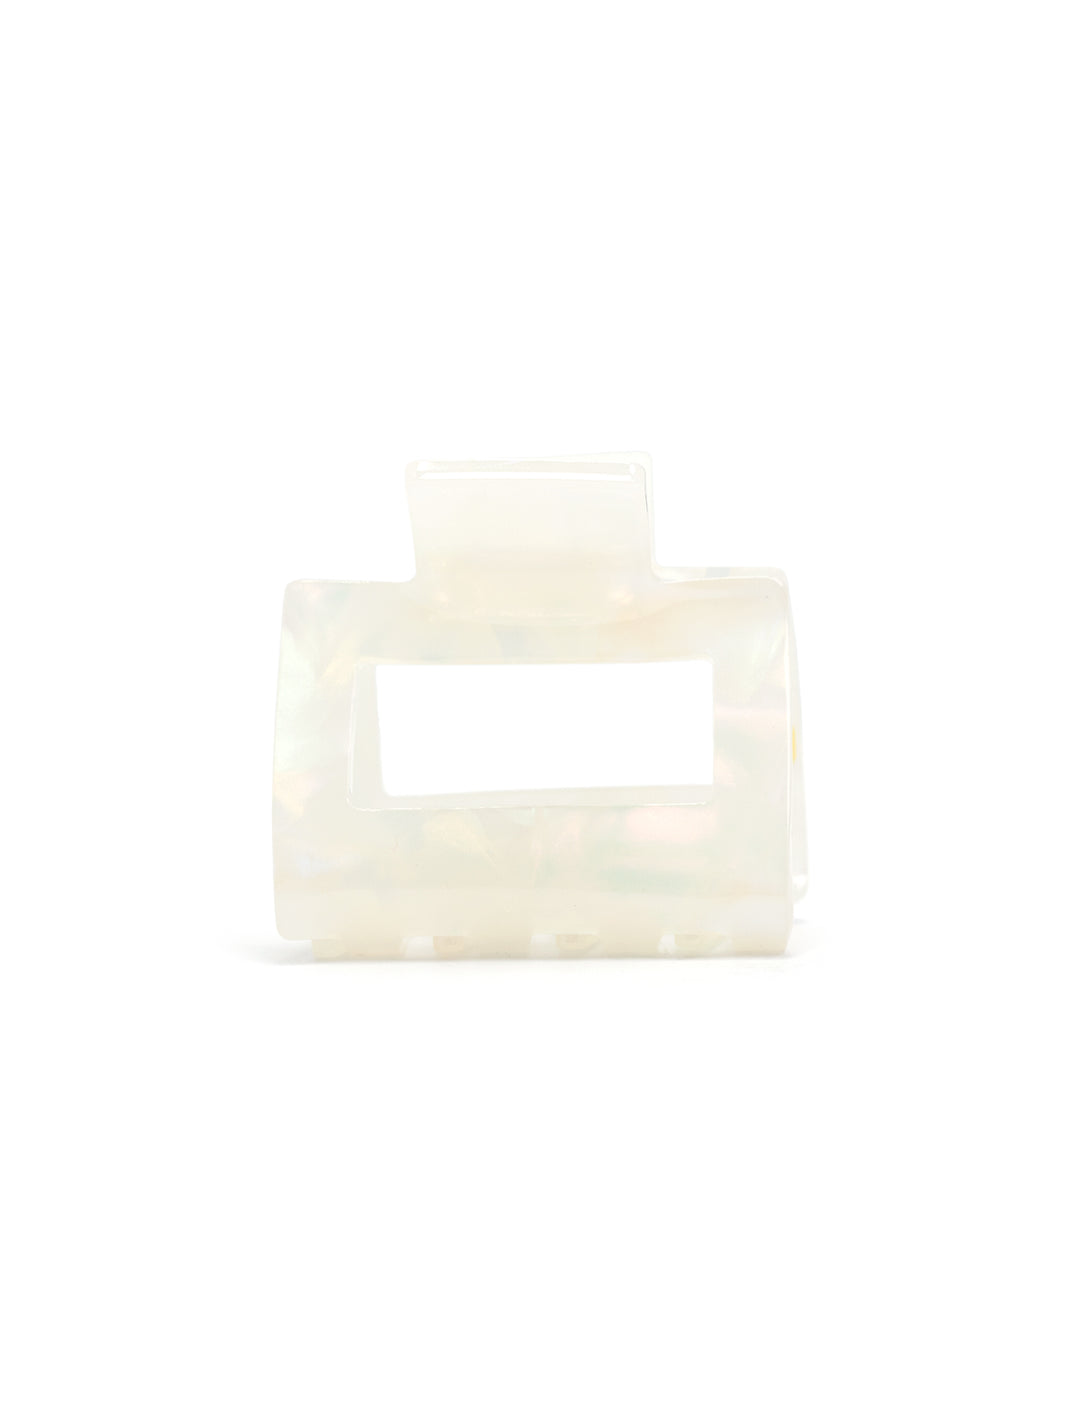 Front view of Tiepology's eco kylie hair clip in ivory pearl